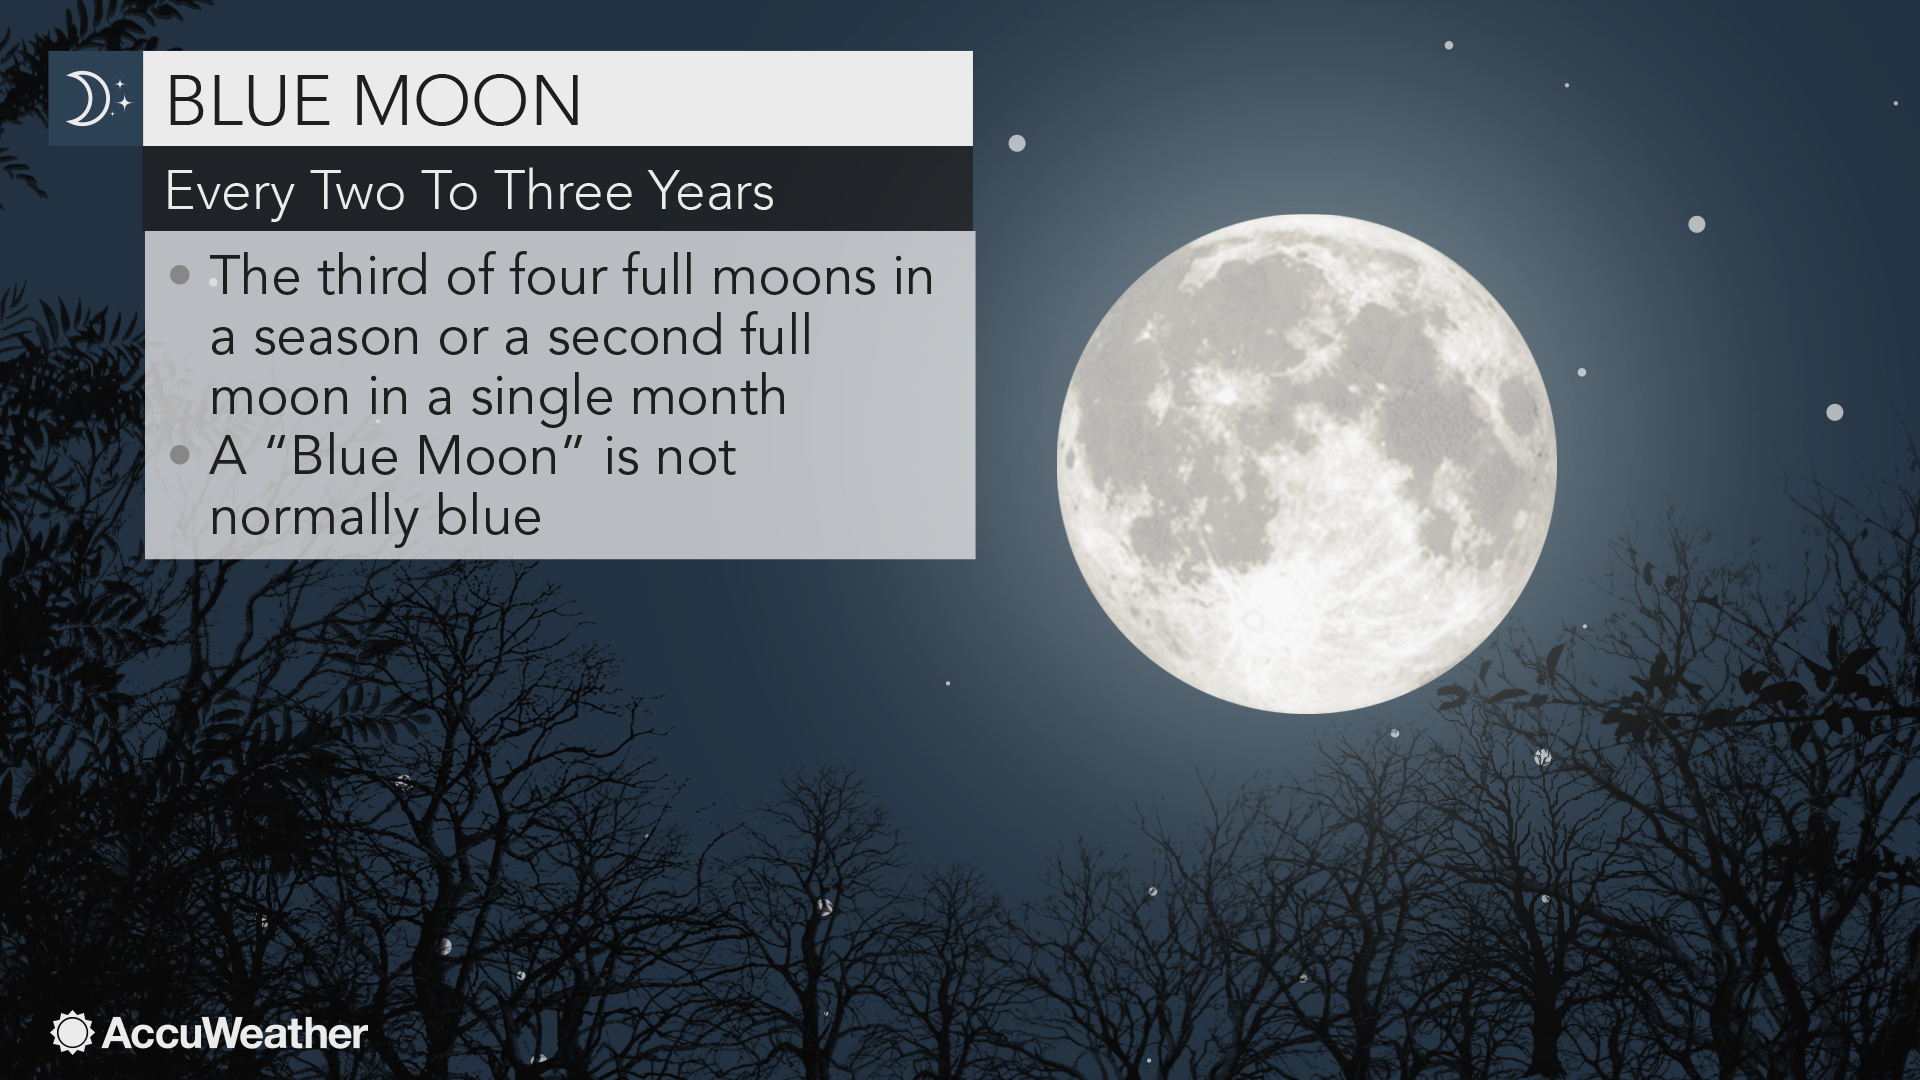 Tonight's full moon will have a big impact